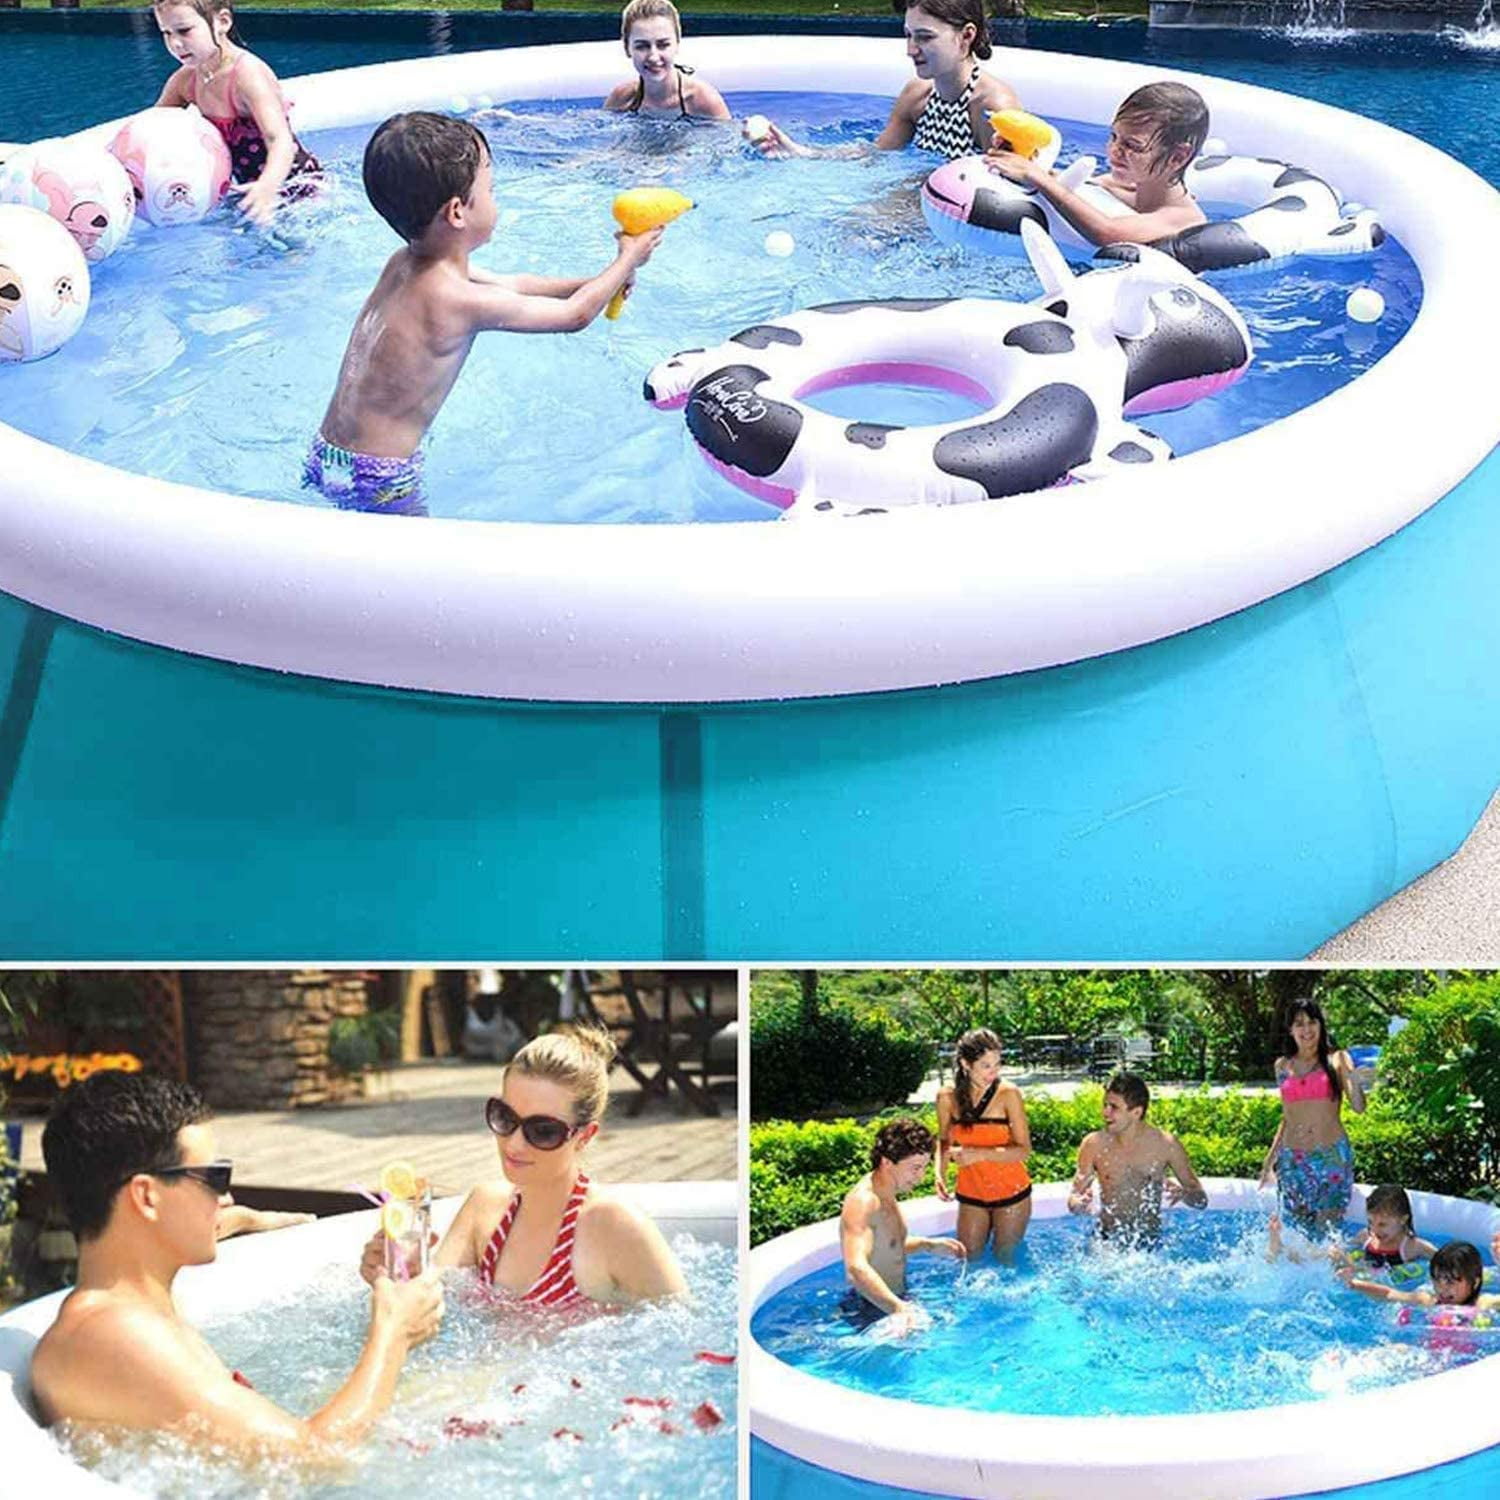 ARTALL Full-Sized Inflatable Top Ring Swimming Pool Round Family Pool for Adults Outdoor Garden Water Sports Game 10 ft x 30 in 